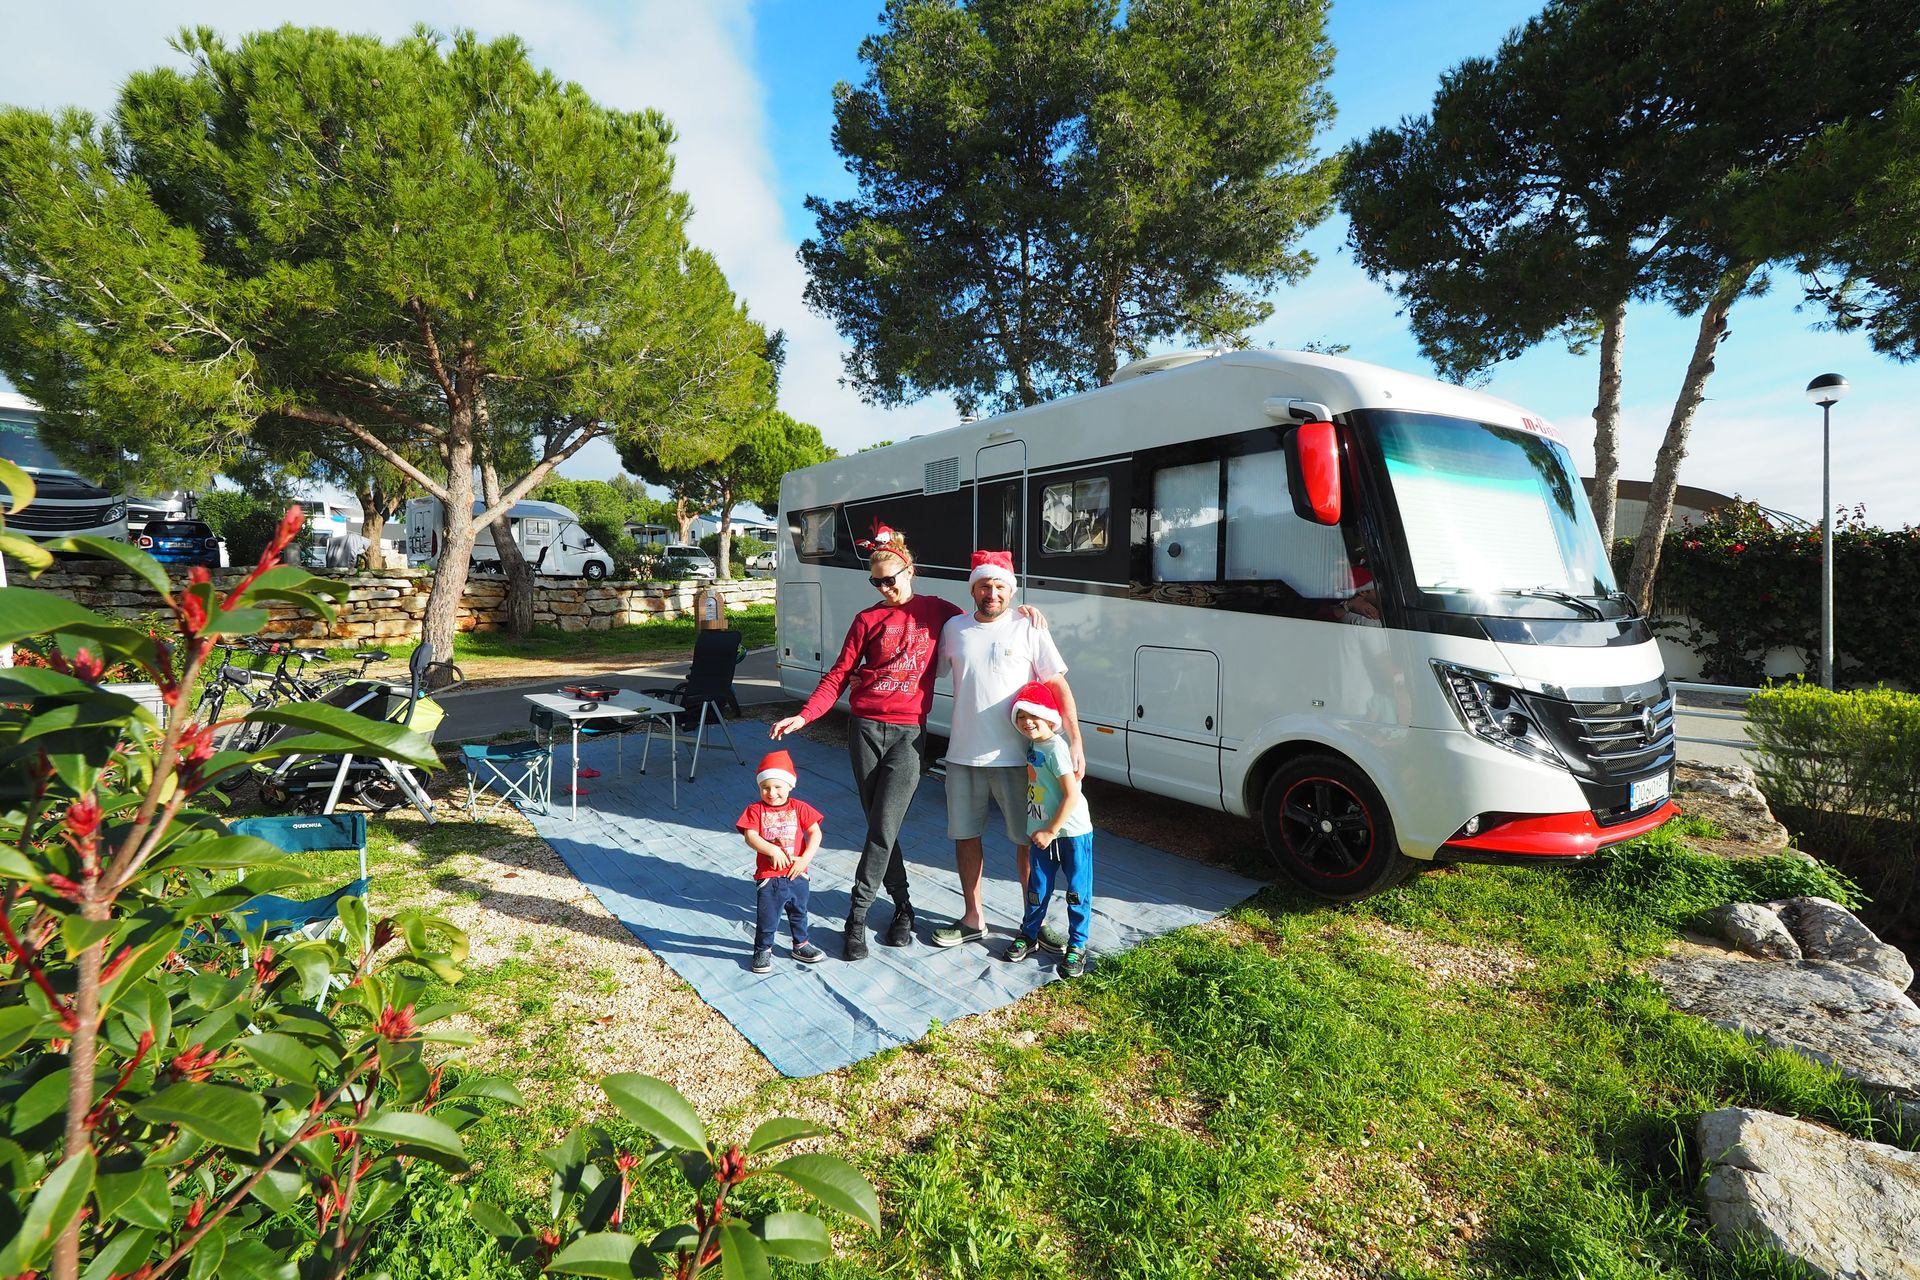 Holidays in RV - Spain and Portugal [COSTS] – main image